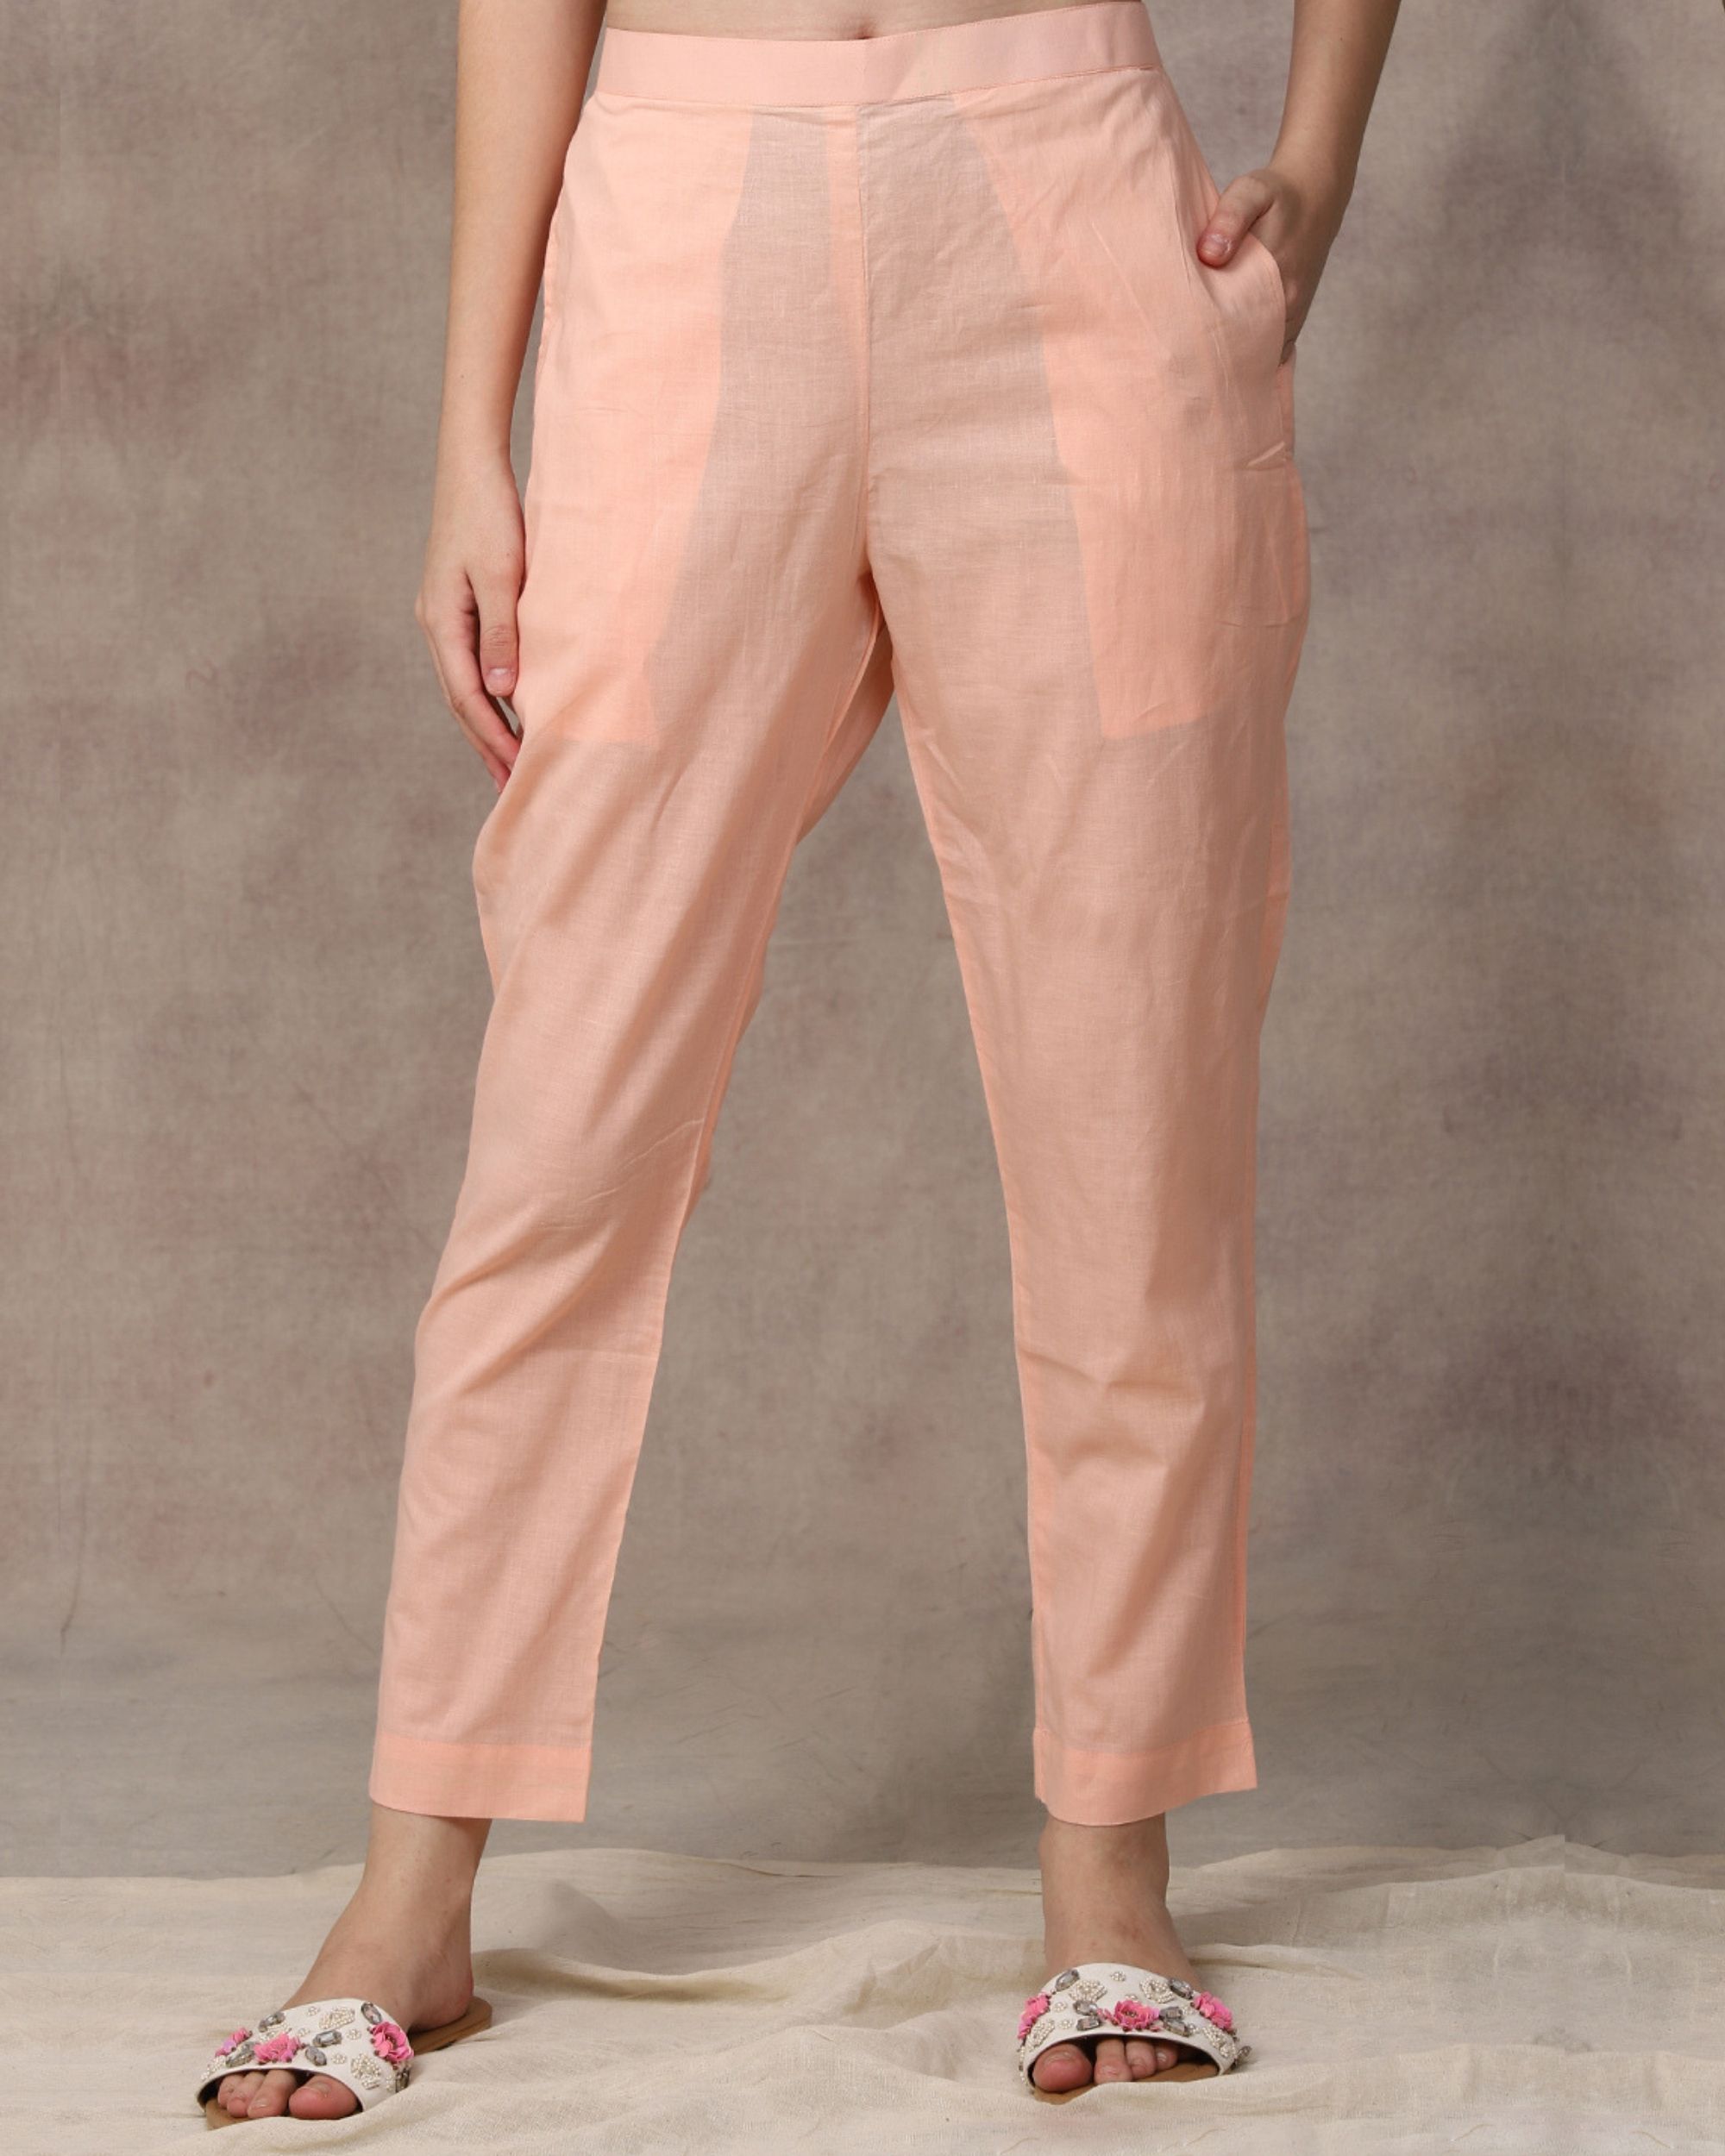 Lemon and salmon pink suit-set- set of two by The Cotton Staple | The ...